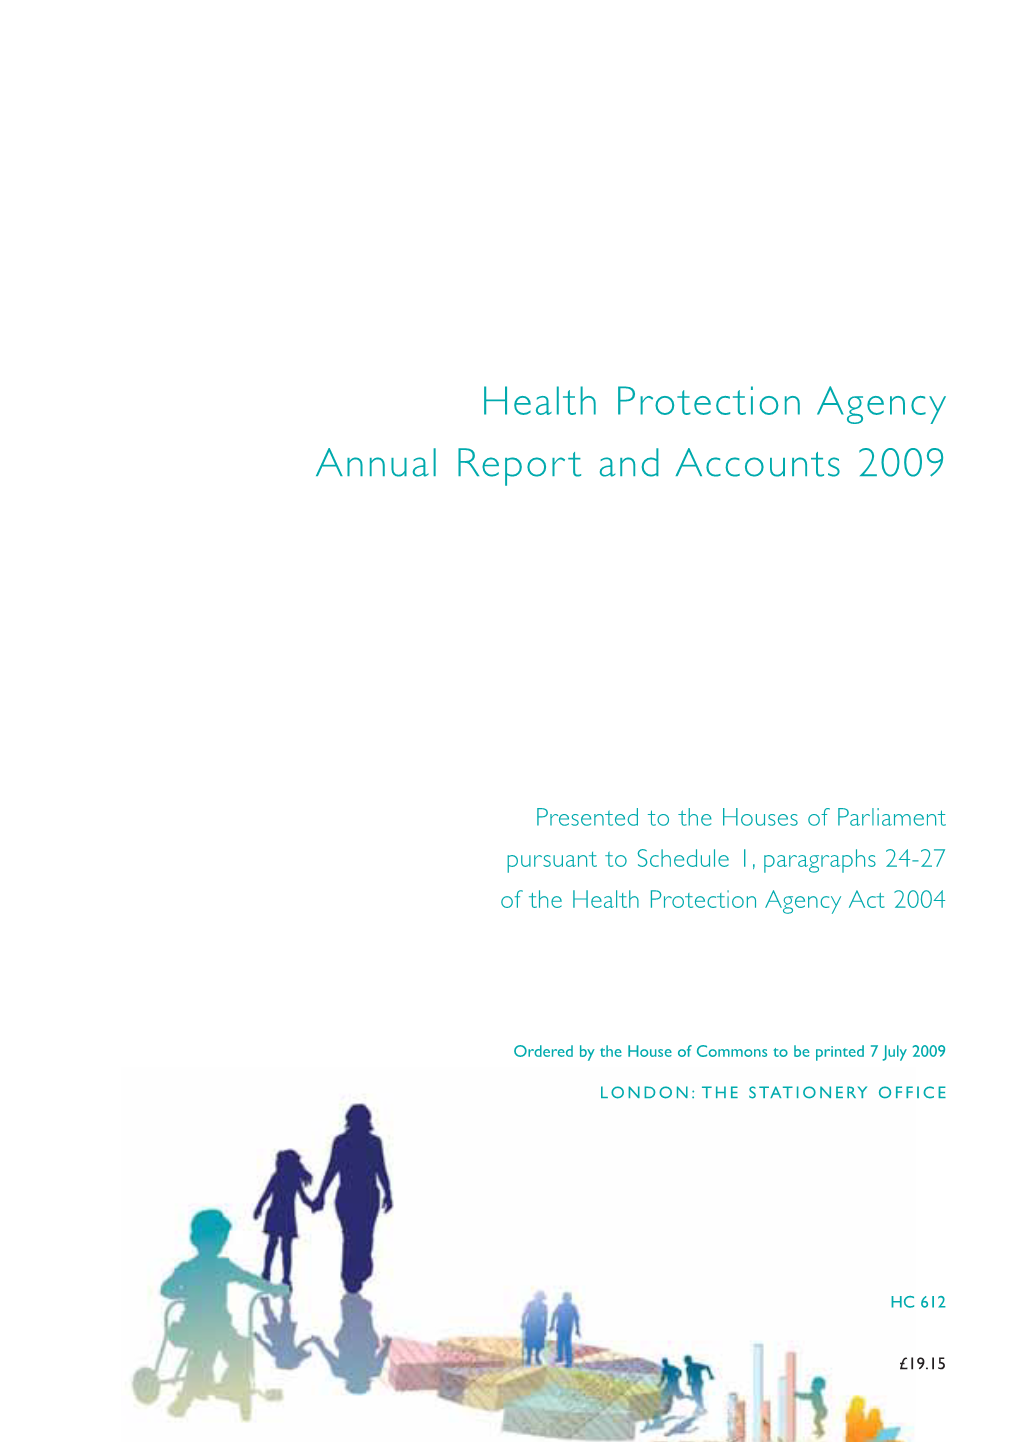 Health Protection Agency Annual Report and Accounts 2009